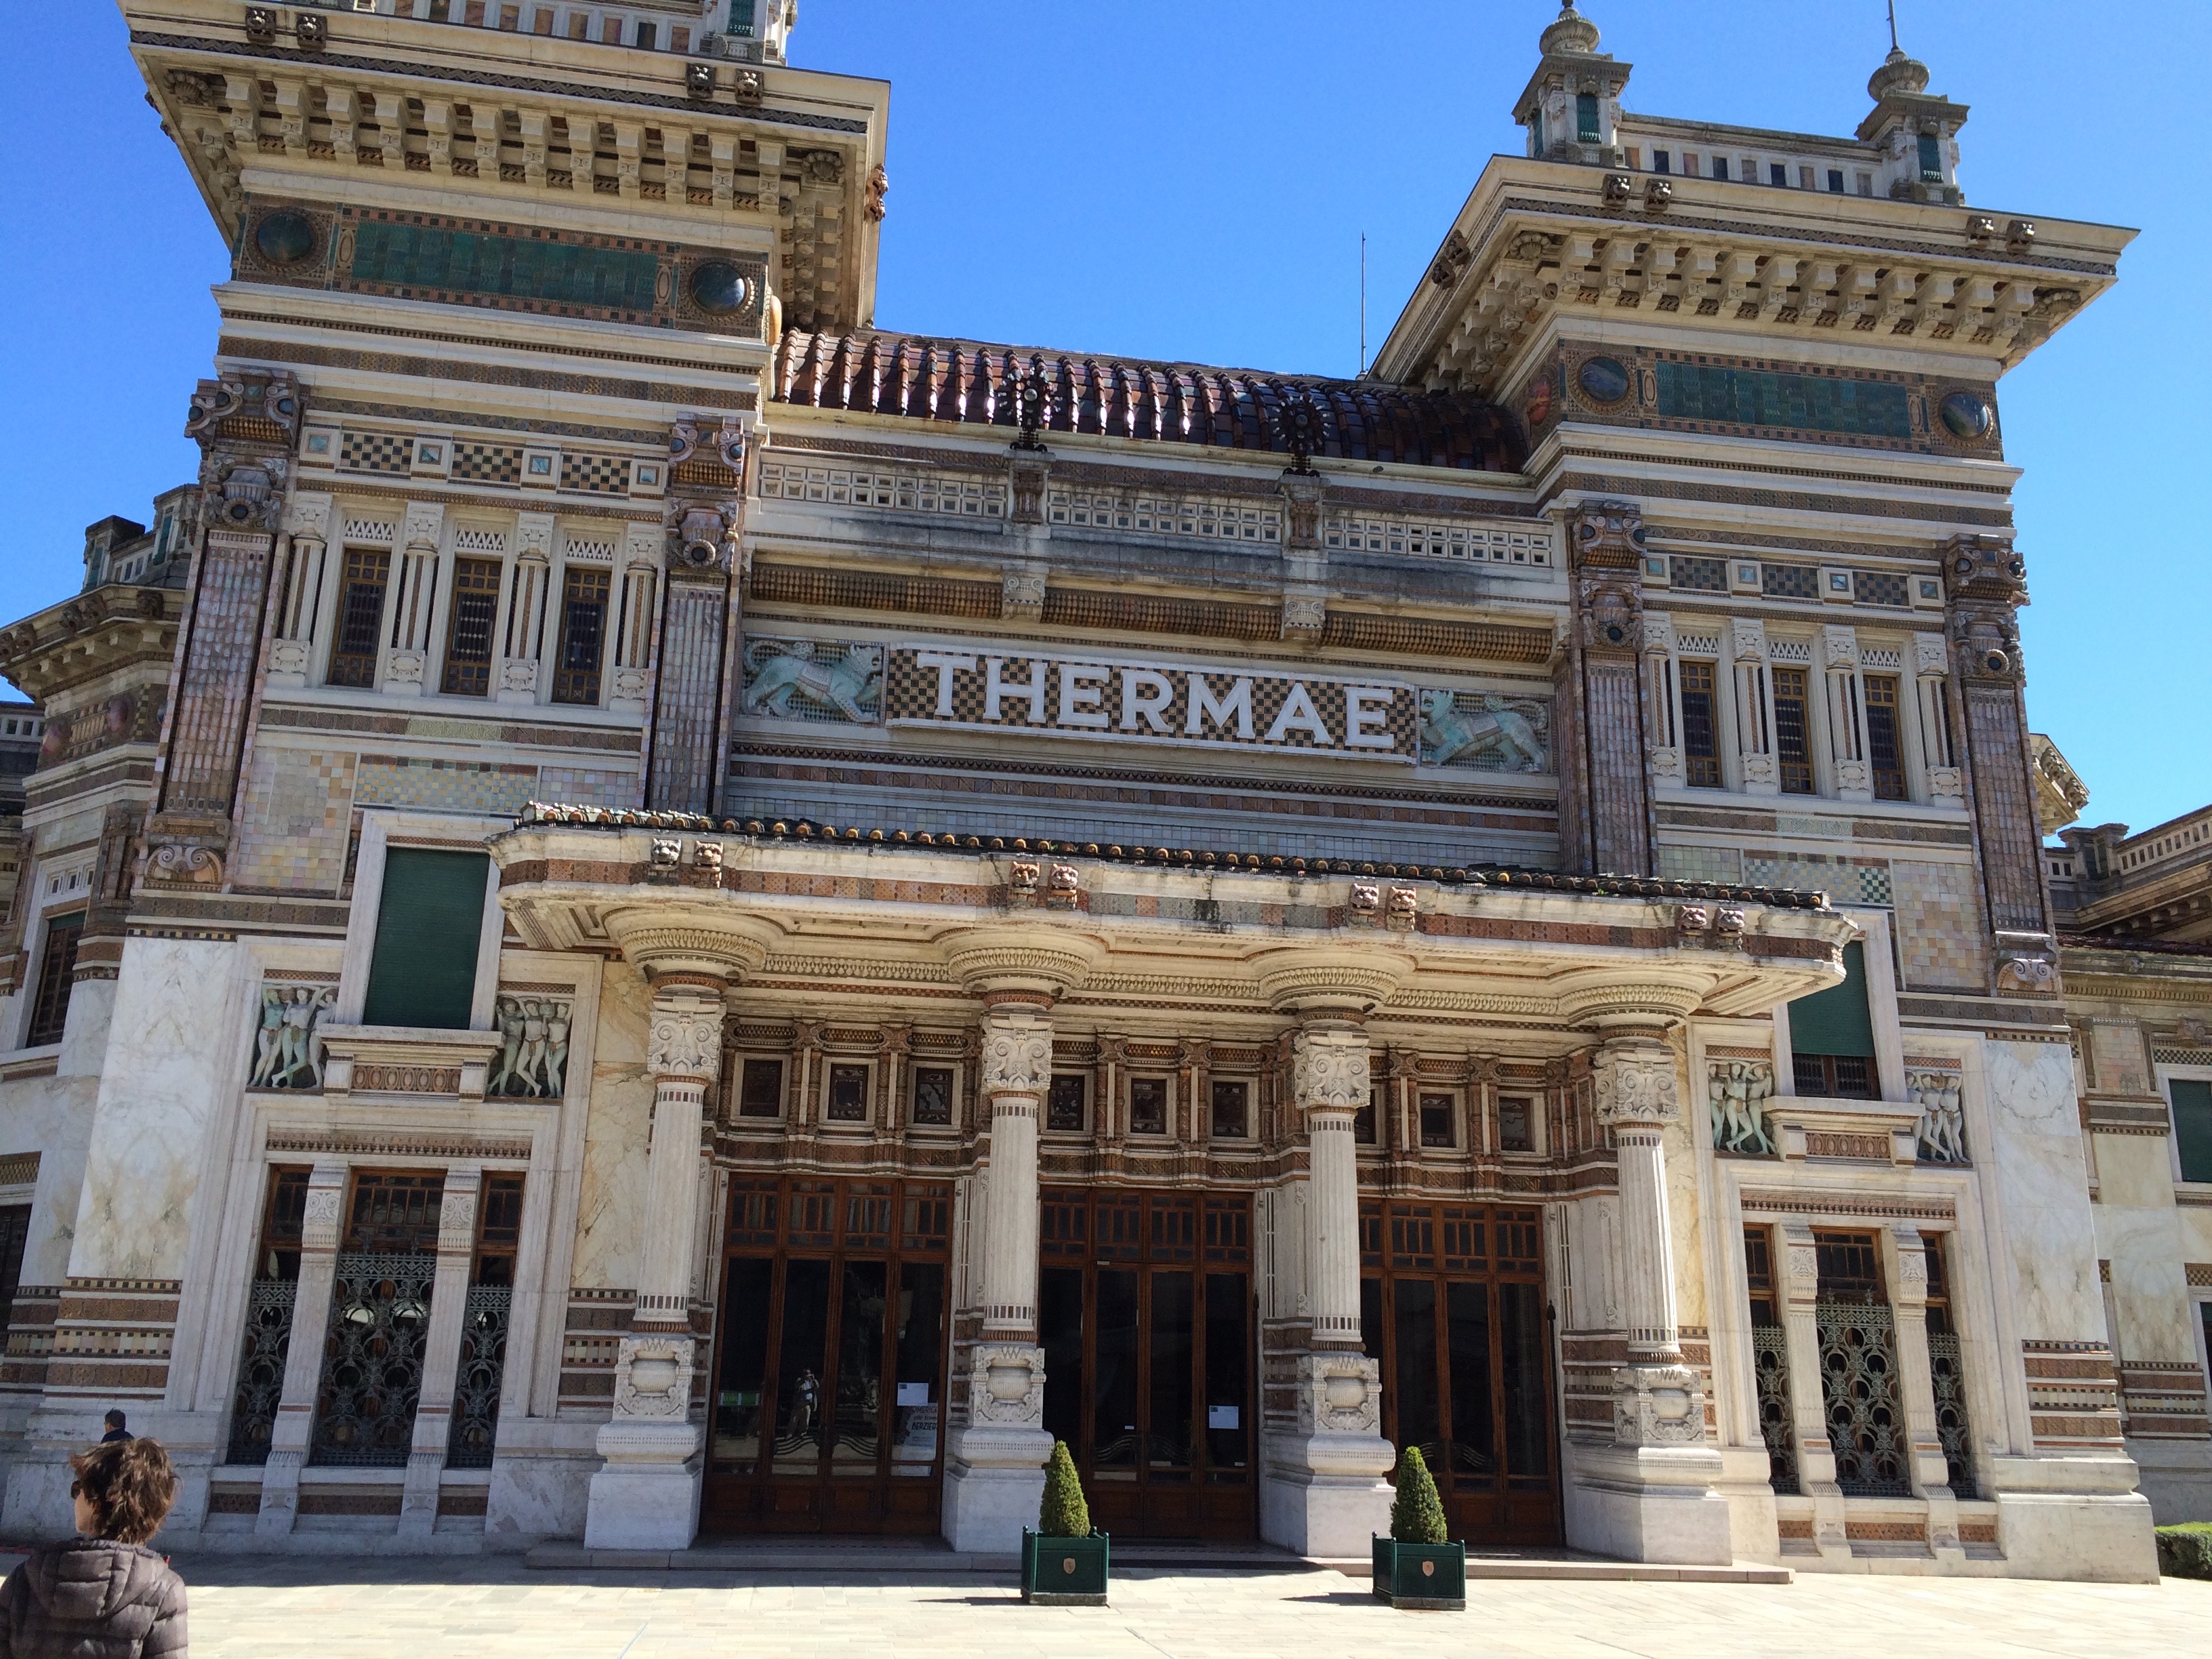 Thermae Salsomaggiore